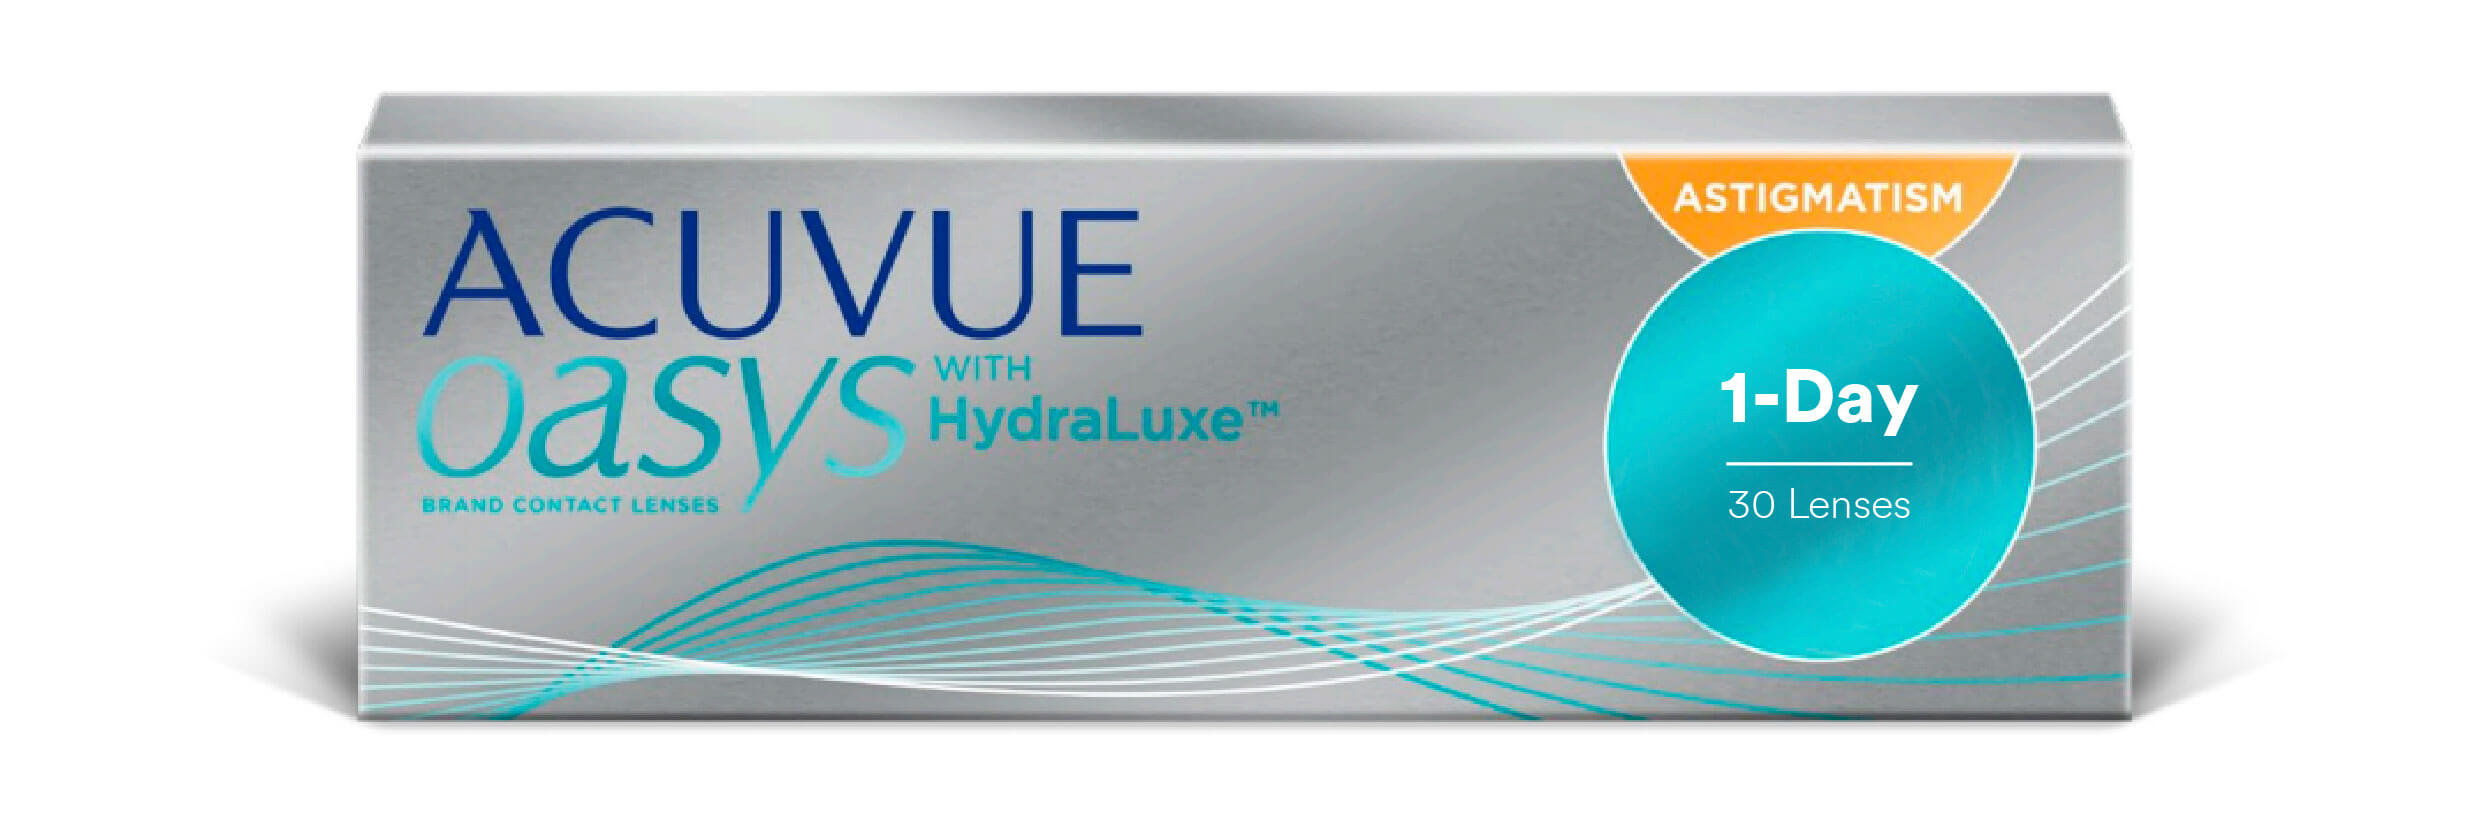 ACUVUE OASYS 1-Day for ASTIGMATISM box